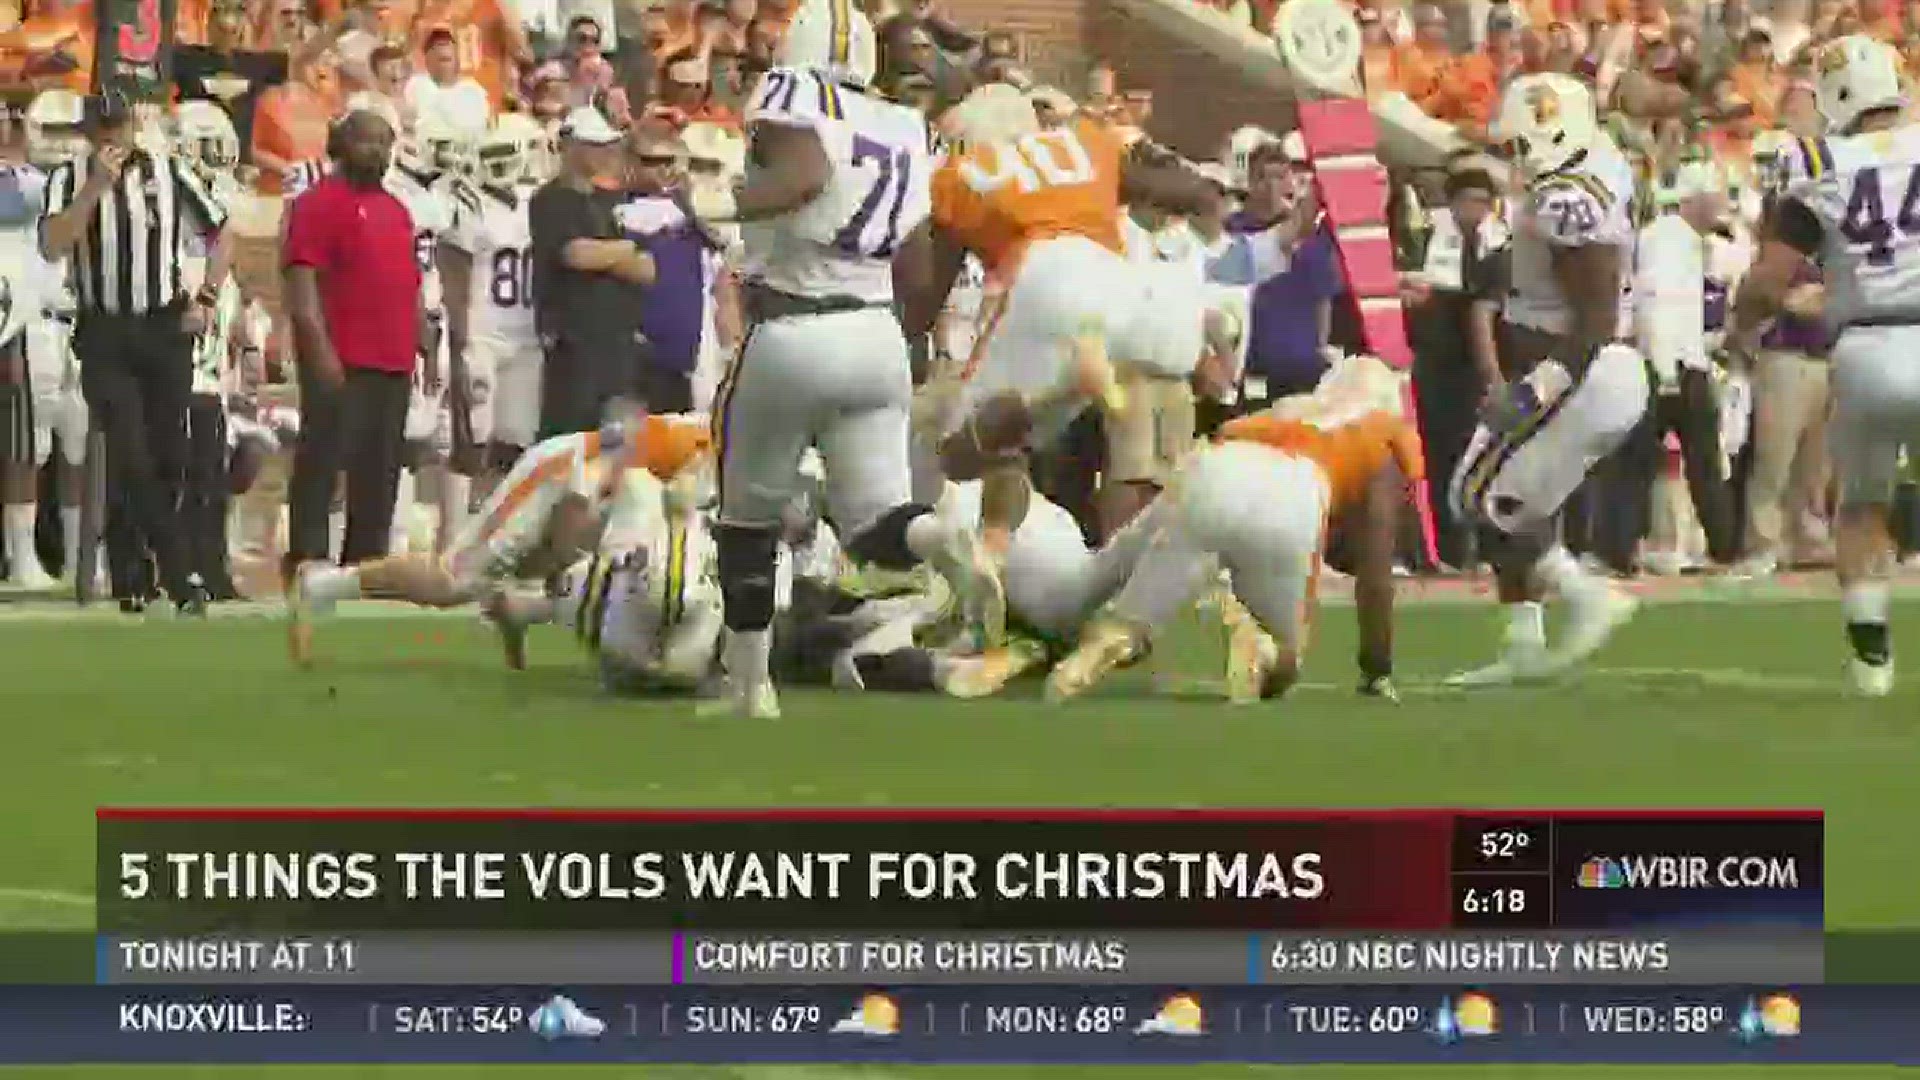 Luke Slabaugh digs into the five things the Vols want for Christmas.